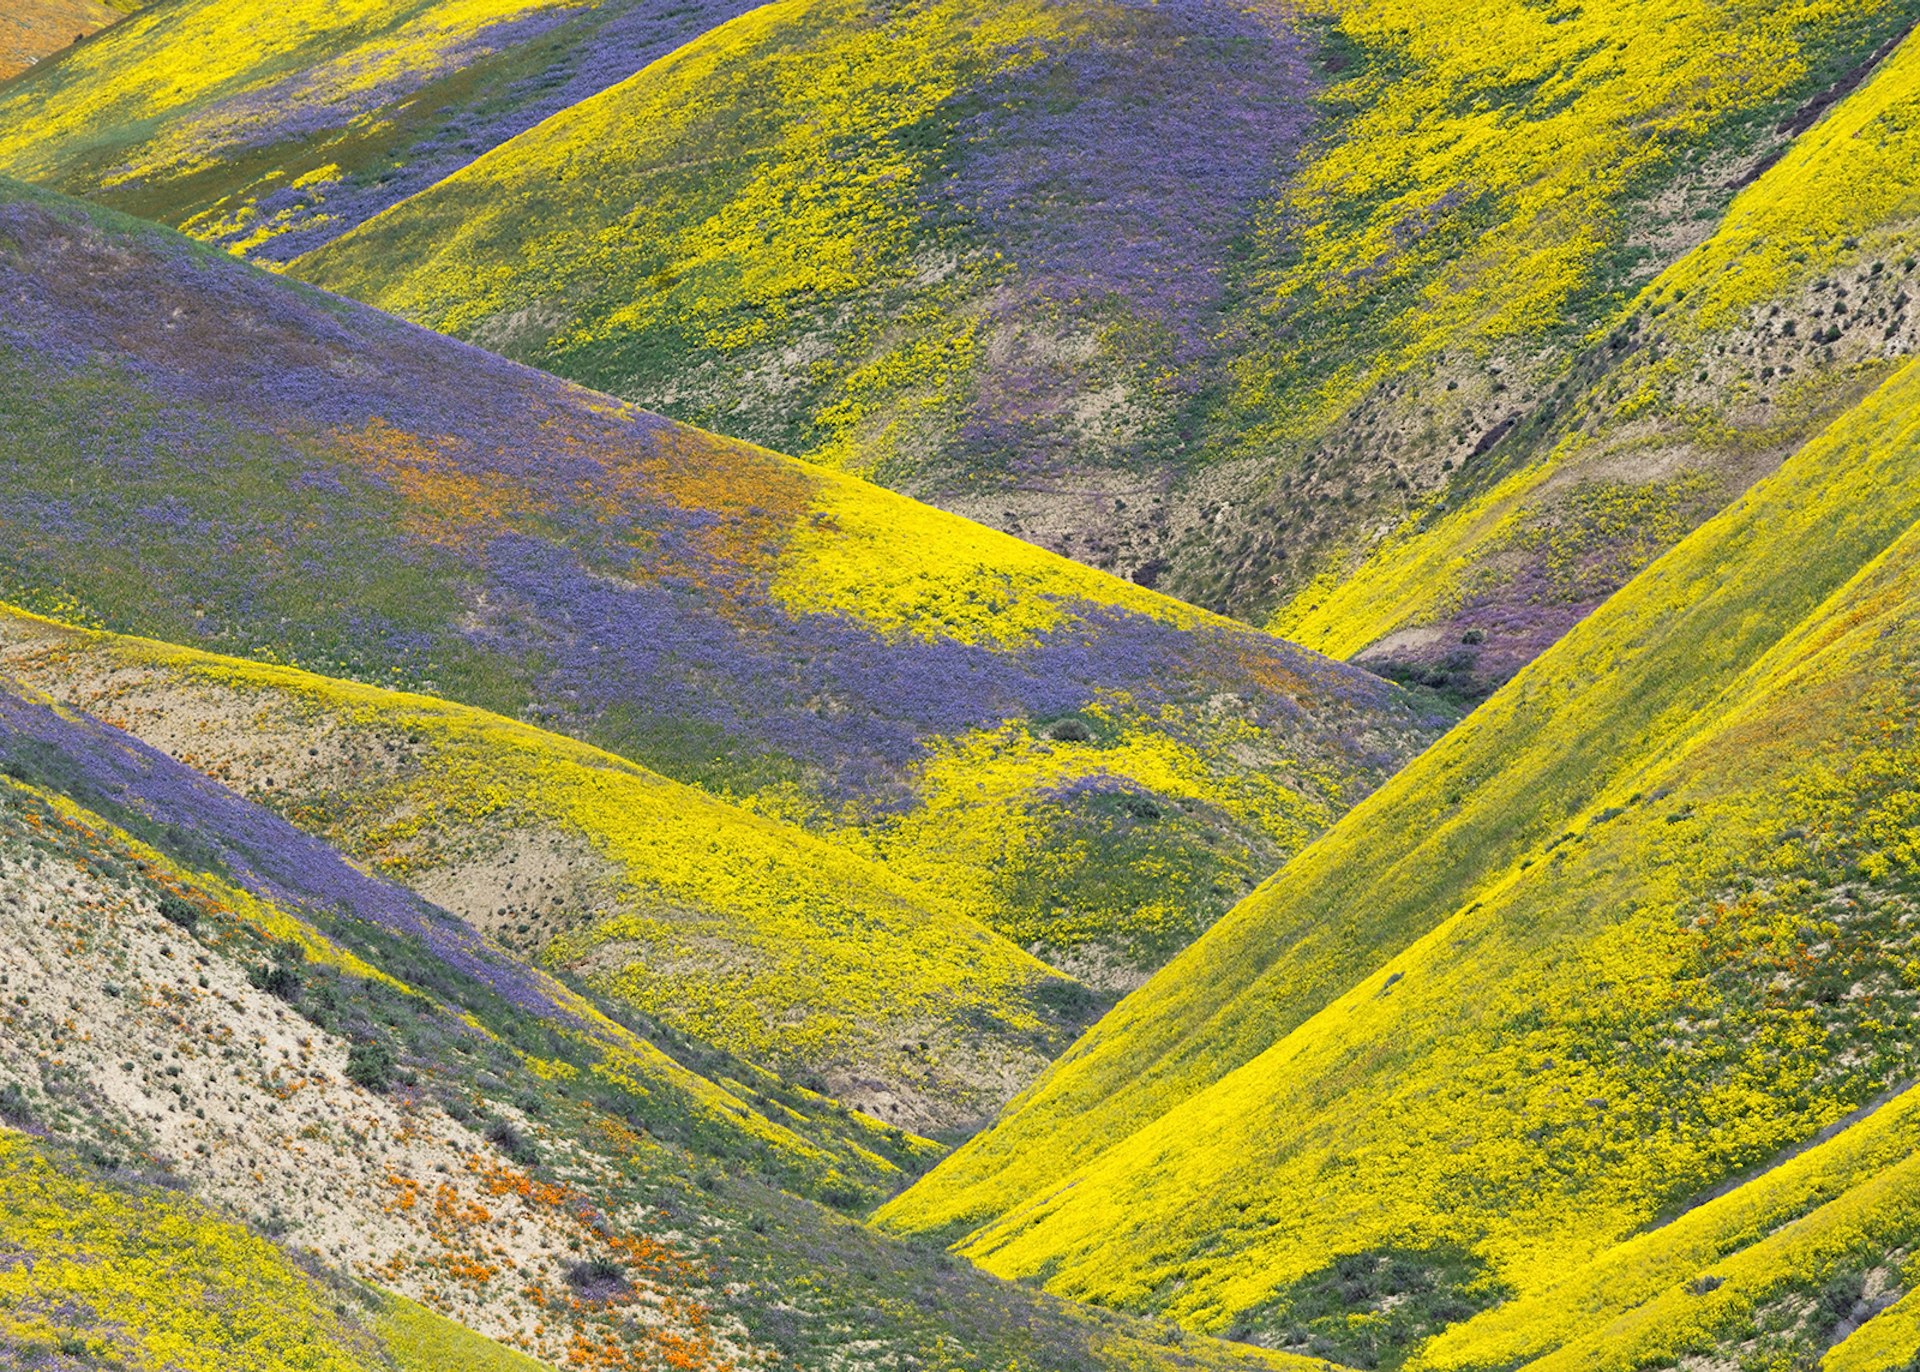 Wildflowers in the Temblor Range, part of the Carrizo Plain National Monument, California